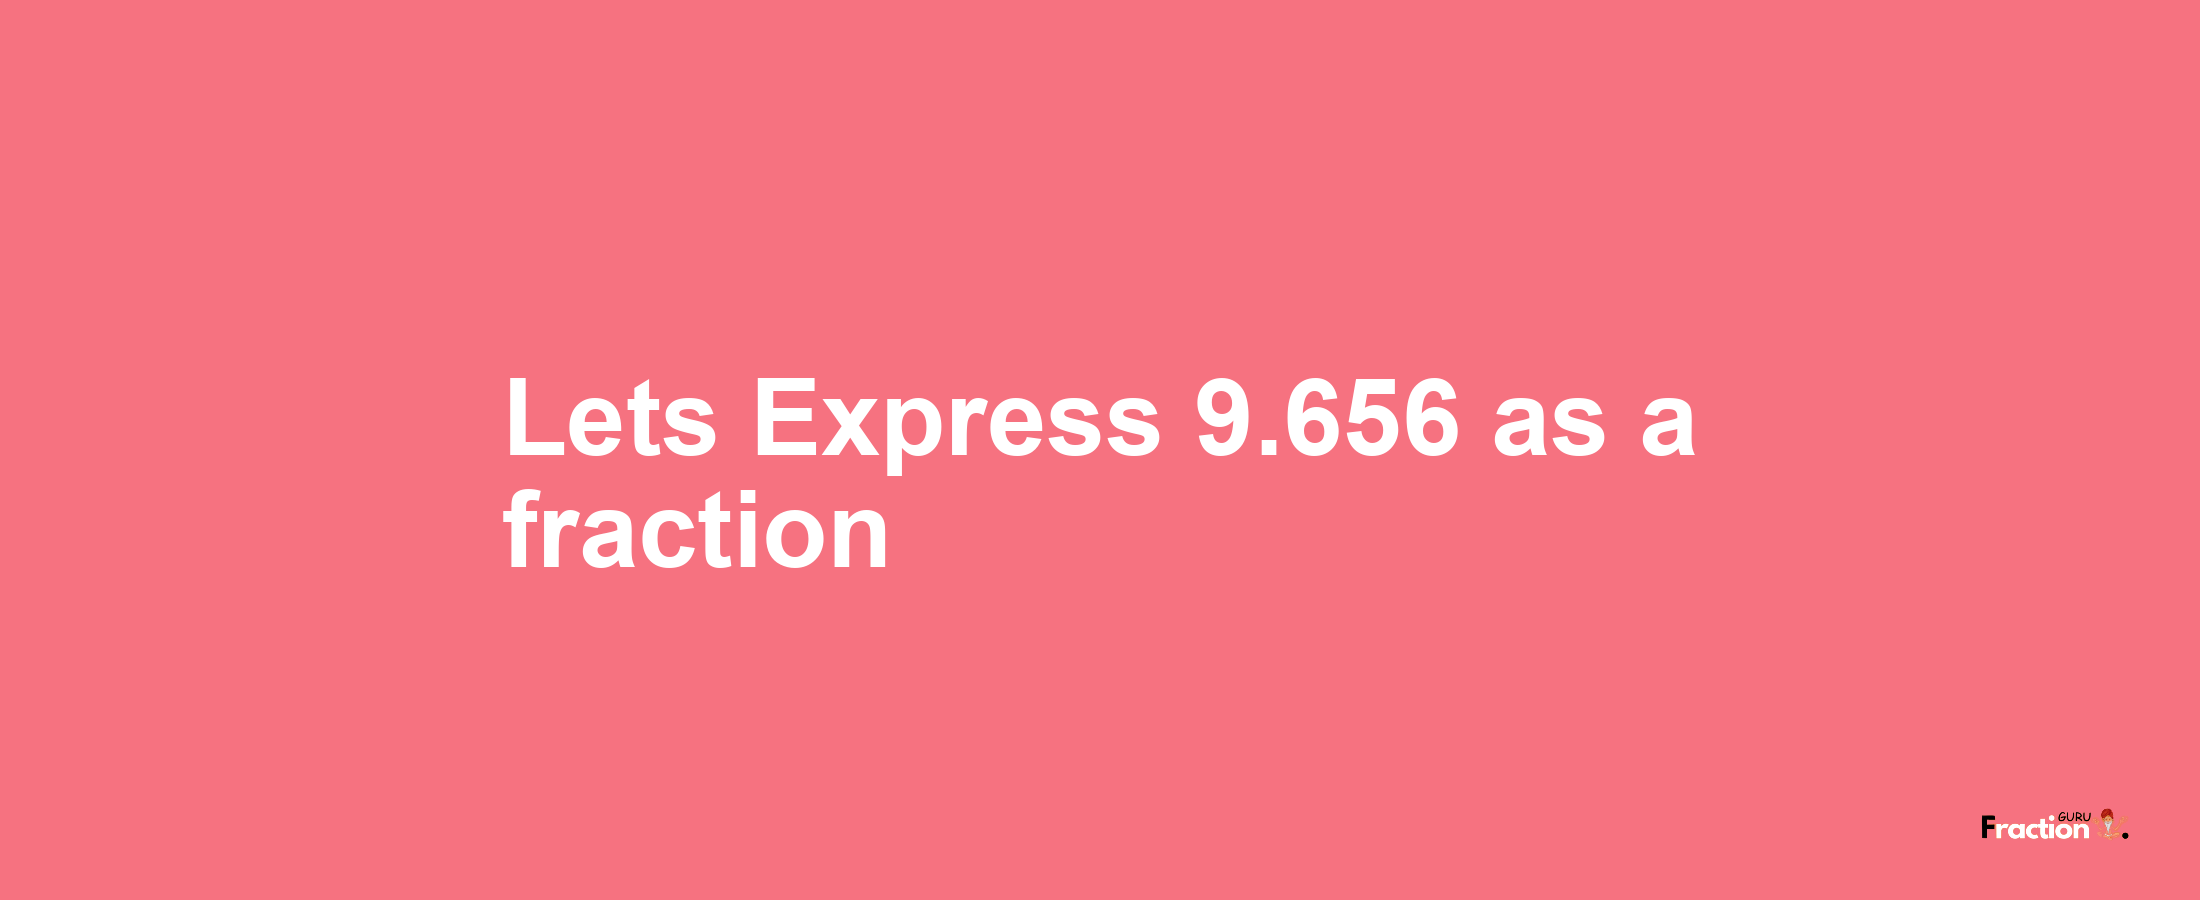 Lets Express 9.656 as afraction